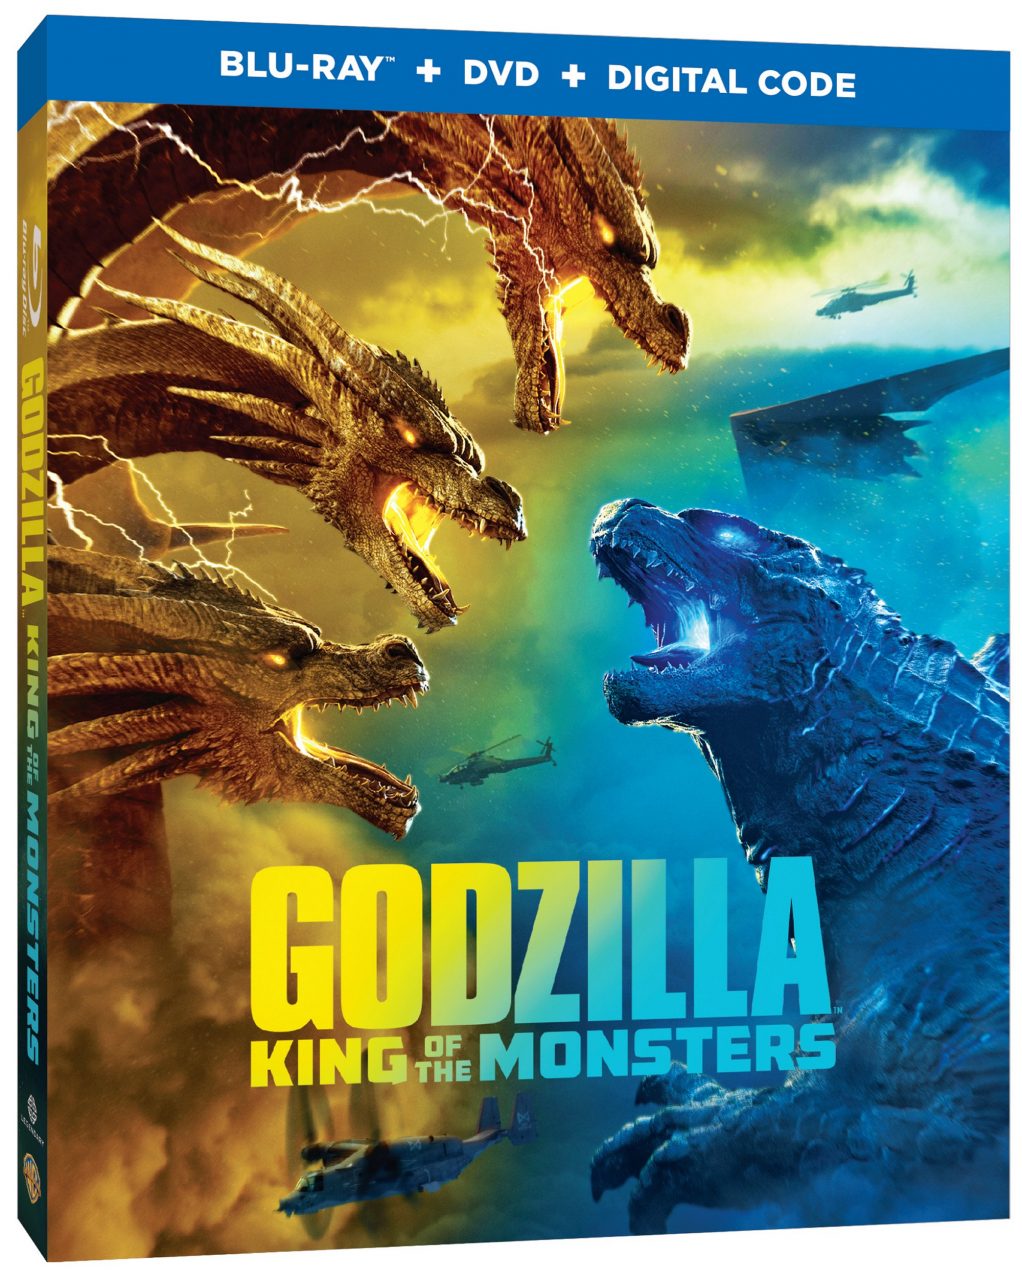 Godzilla: King Of The Monsters Blu-Ray Combo pack (Warner Bros. Home Entertainment)